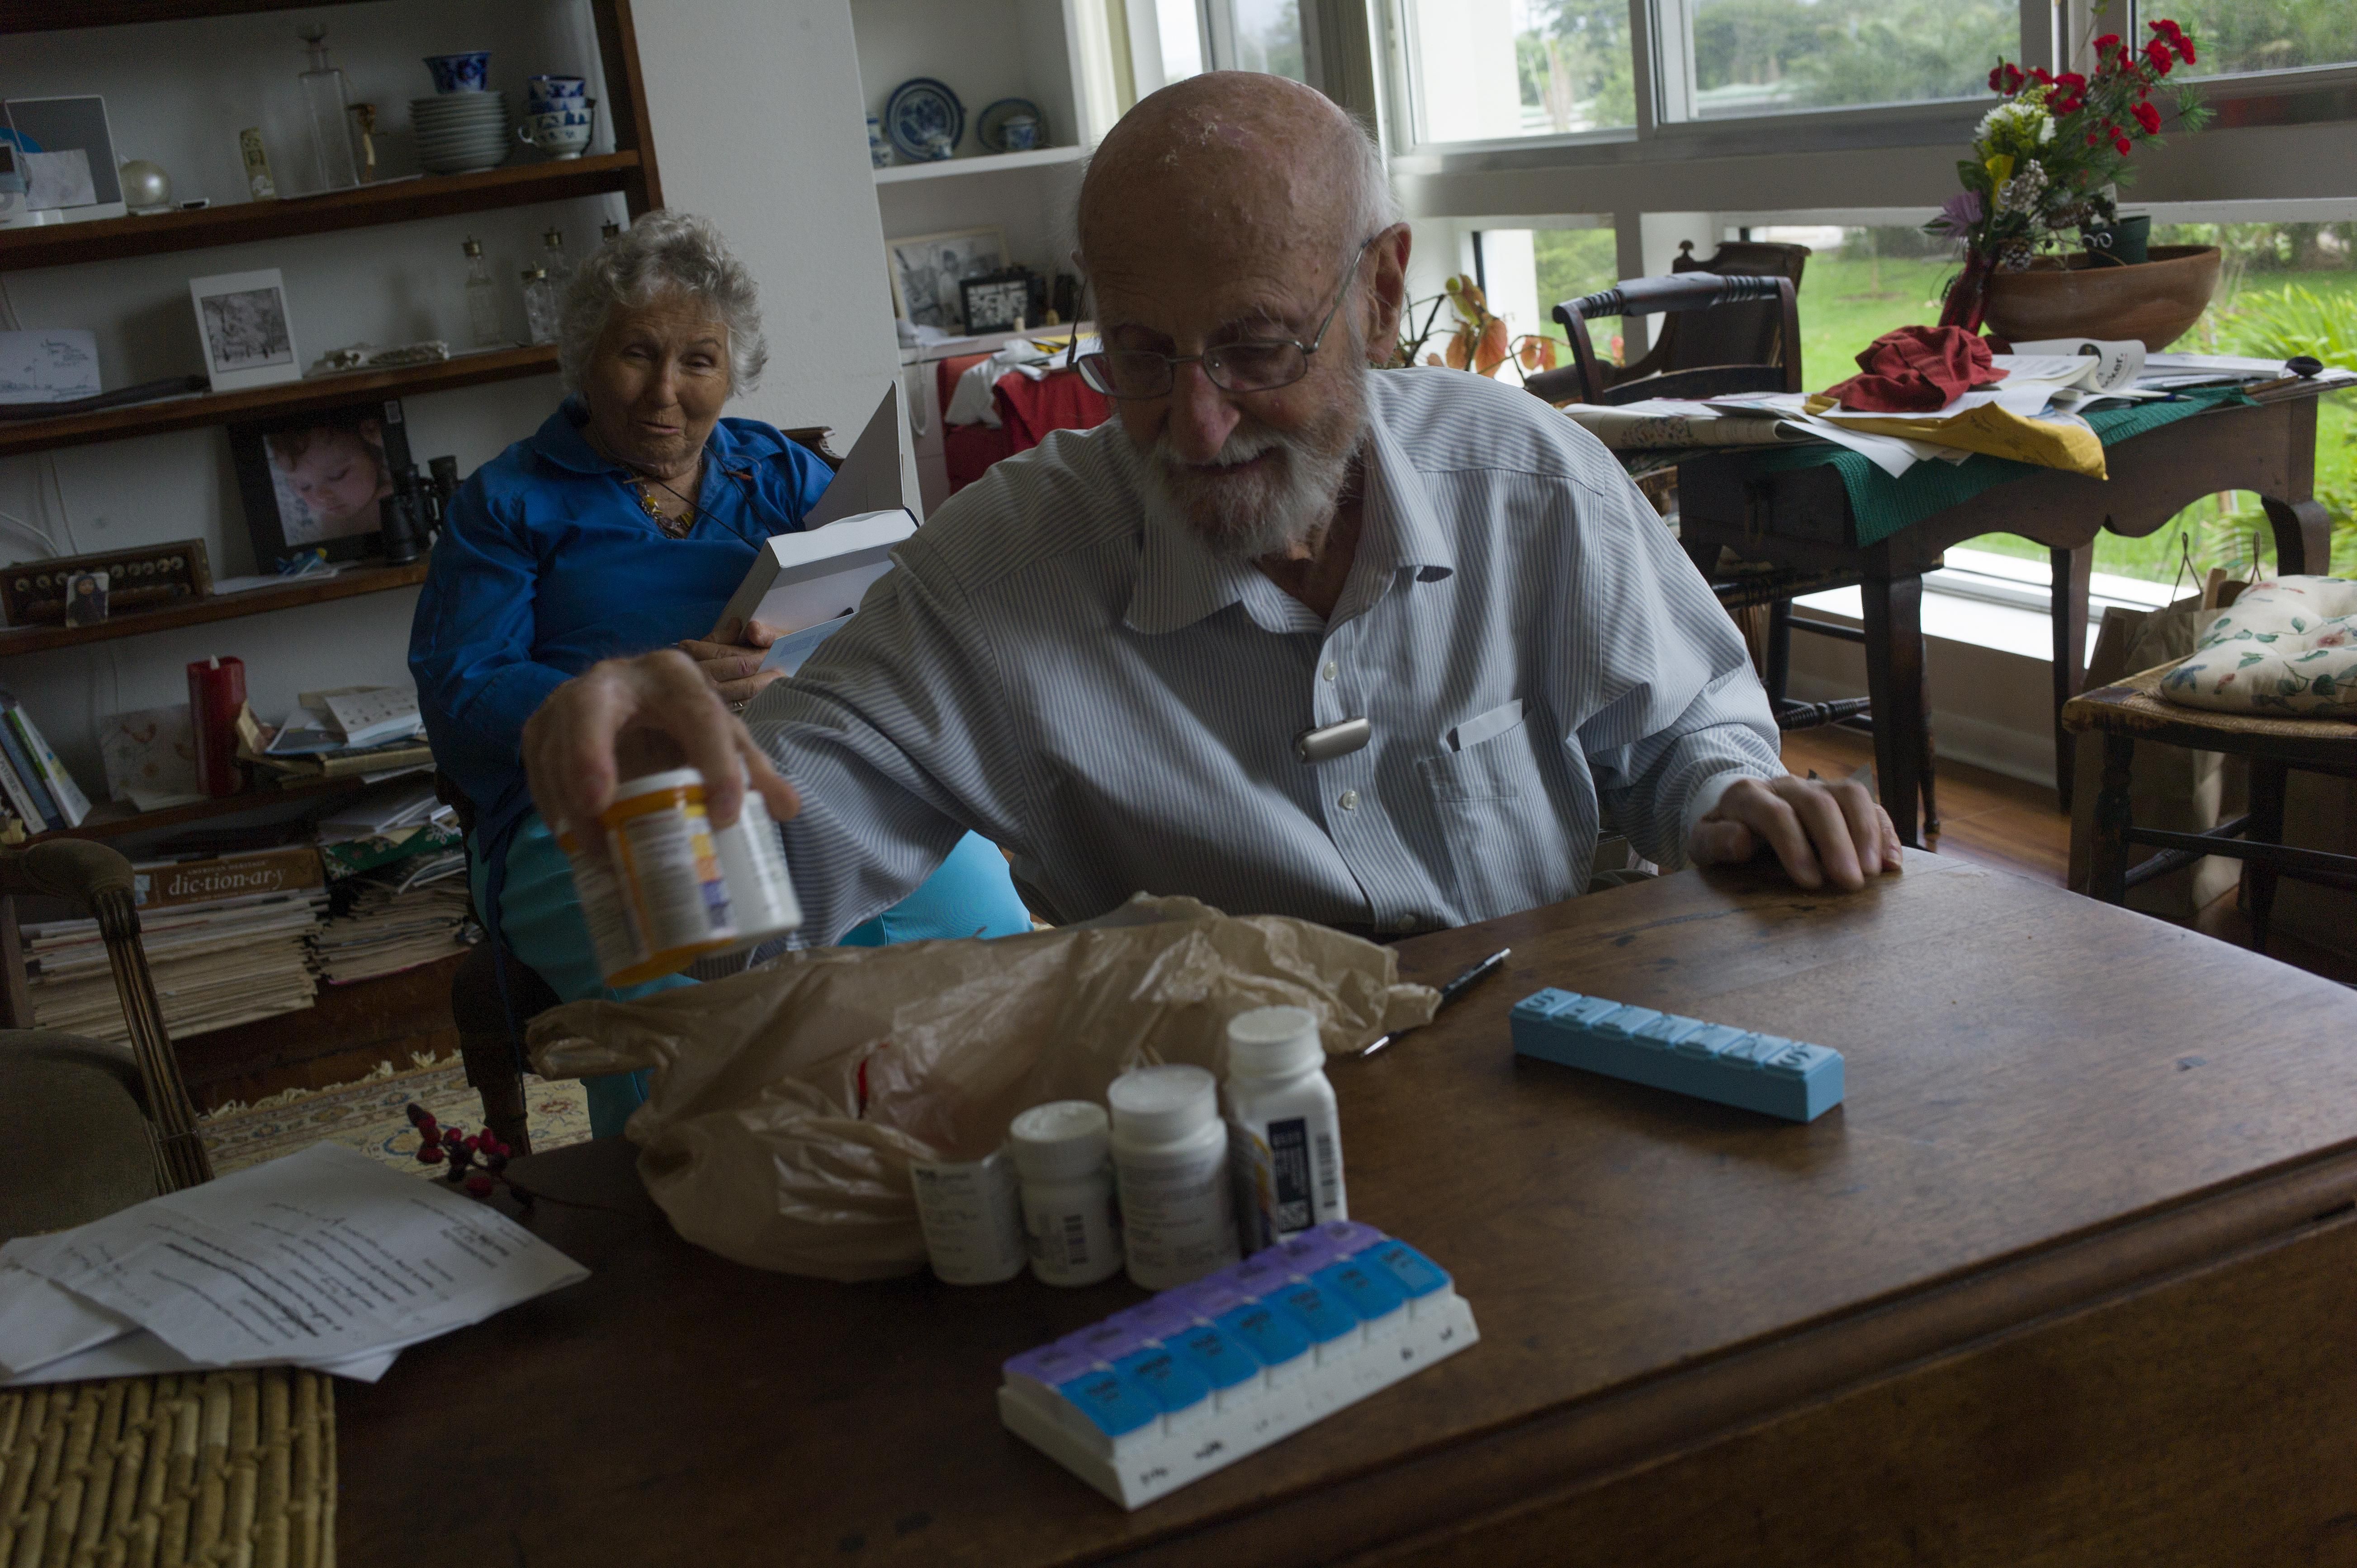 Charles Miller, 90, prepares the daily pills his wife will need for the week on January 4, 2020, in Sarasota, Florida. After suffering a stroke and heart attack, his wife needs approximately ten different medicines daily which need to be carefully monitored. (Photo: Andrew Lichtenstein/Corbis via Getty Images)